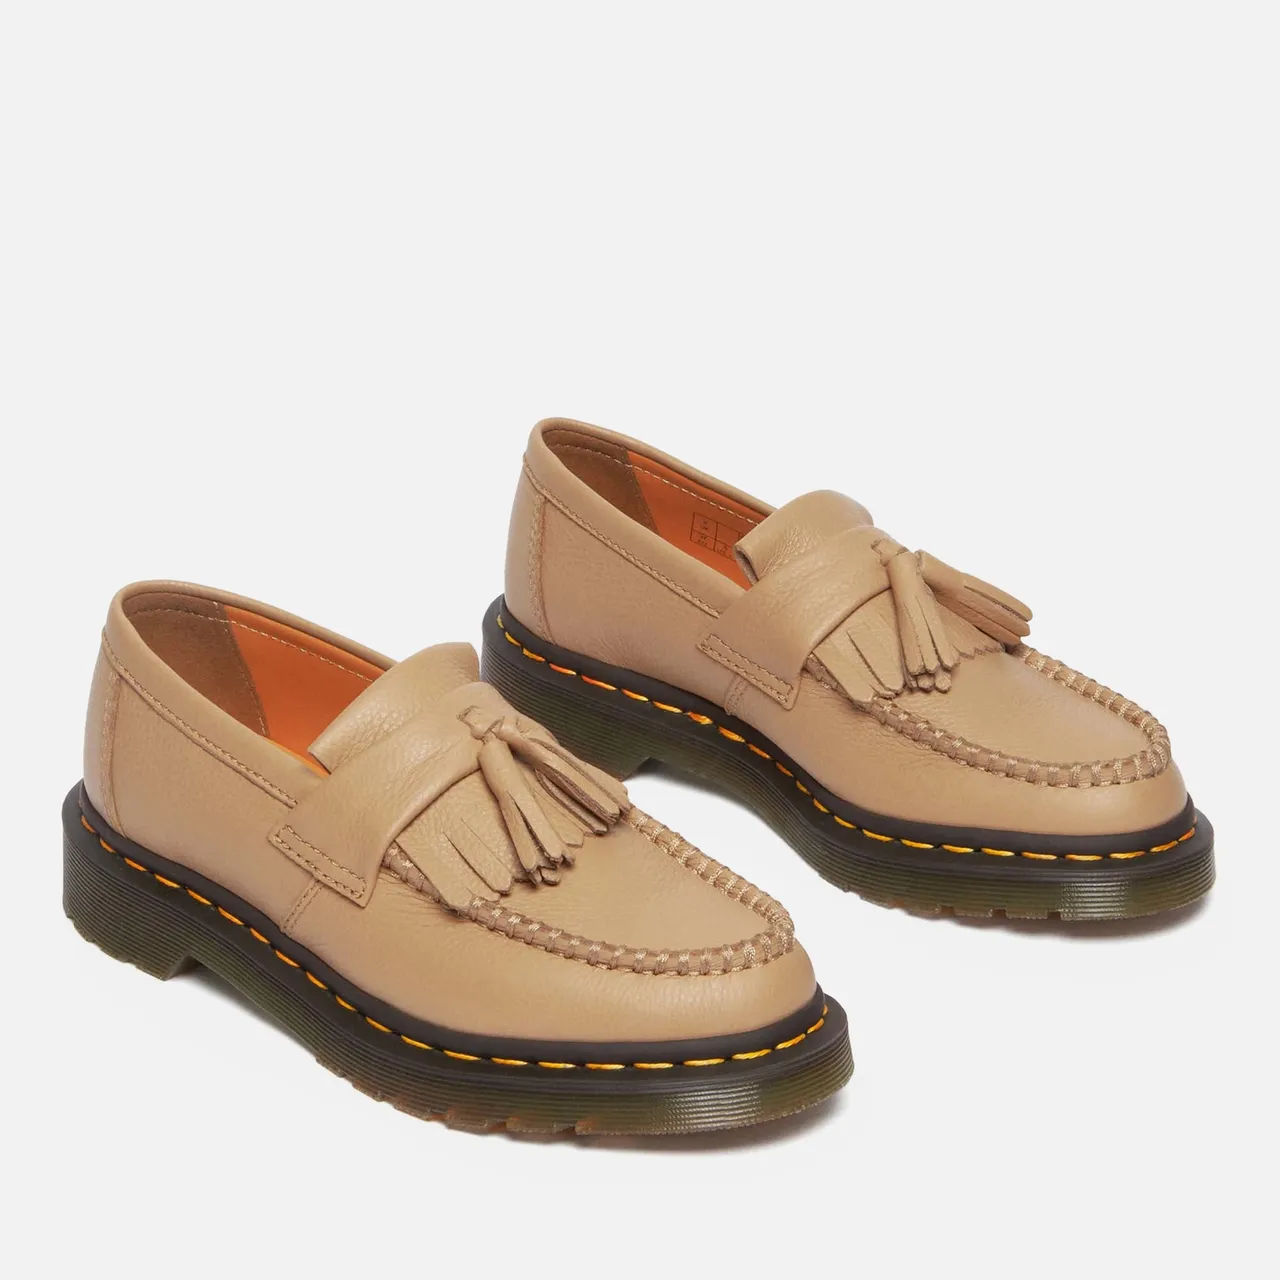 Dr. Martens Adrian Virginia Leather Loafers - UK